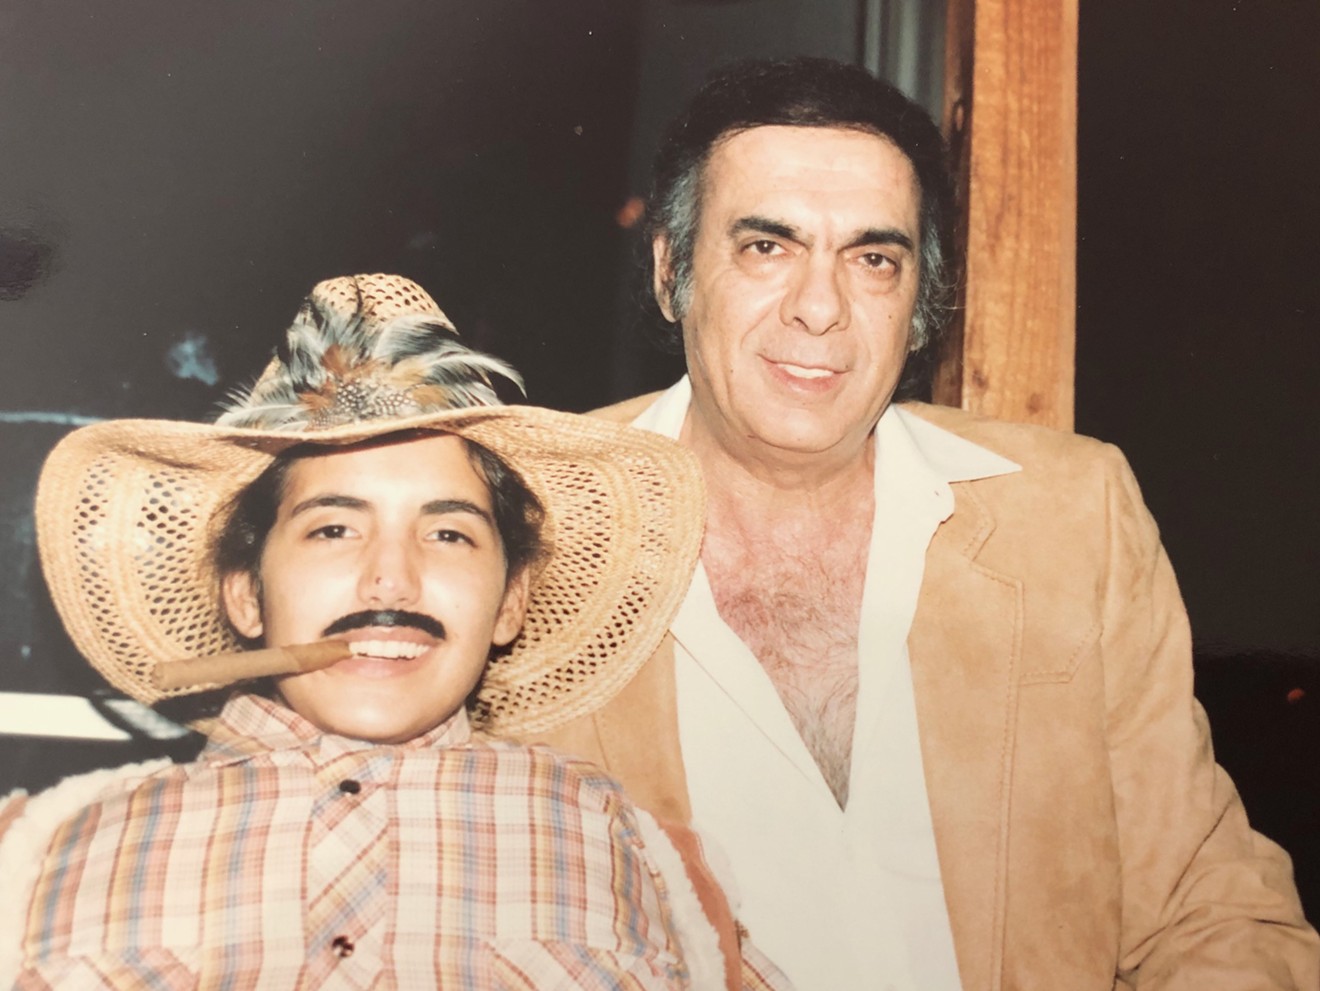 Bernardo de Torres with one of his children on Halloween at the Mutiny Hotel circa the 1980s.